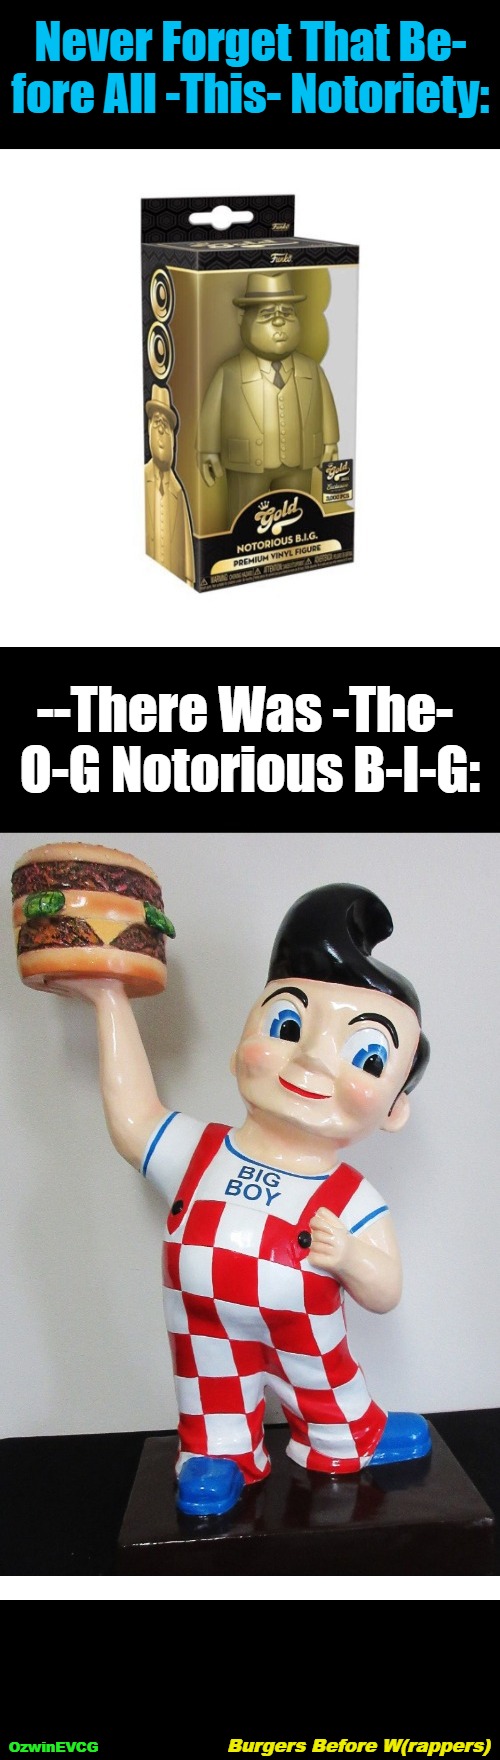 Burgers Before W(rappers) | Never Forget That Be-

fore All -This- Notoriety:; --There Was -The- 

O-G Notorious B-I-G:; Burgers Before W(rappers); OzwinEVCG | image tagged in real talk,history lesson,wrappers,burgers,rappers,memes | made w/ Imgflip meme maker